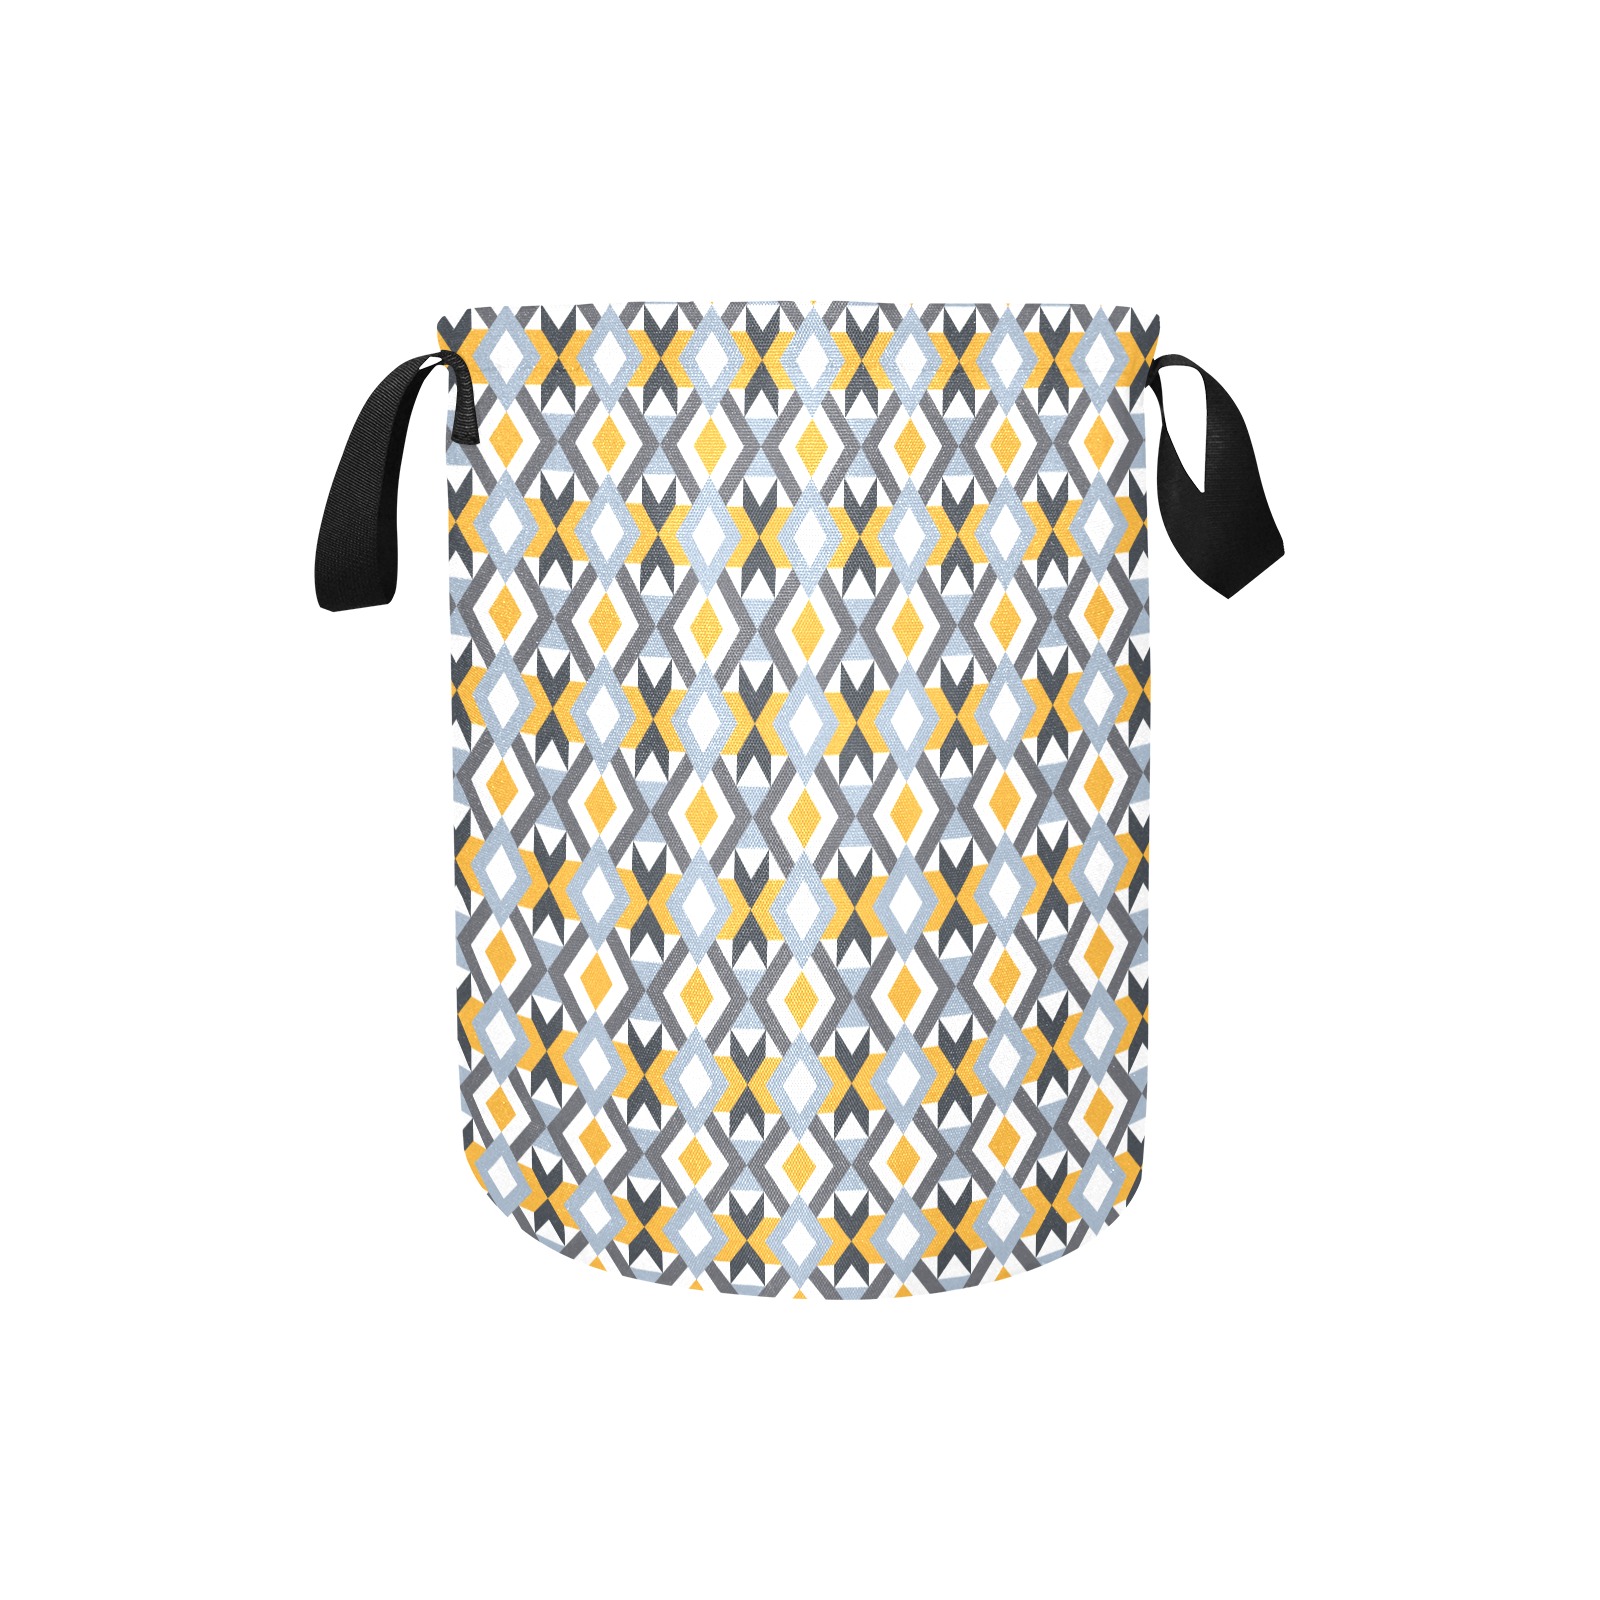 Retro Angles Abstract Geometric Pattern Laundry Bag (Small)